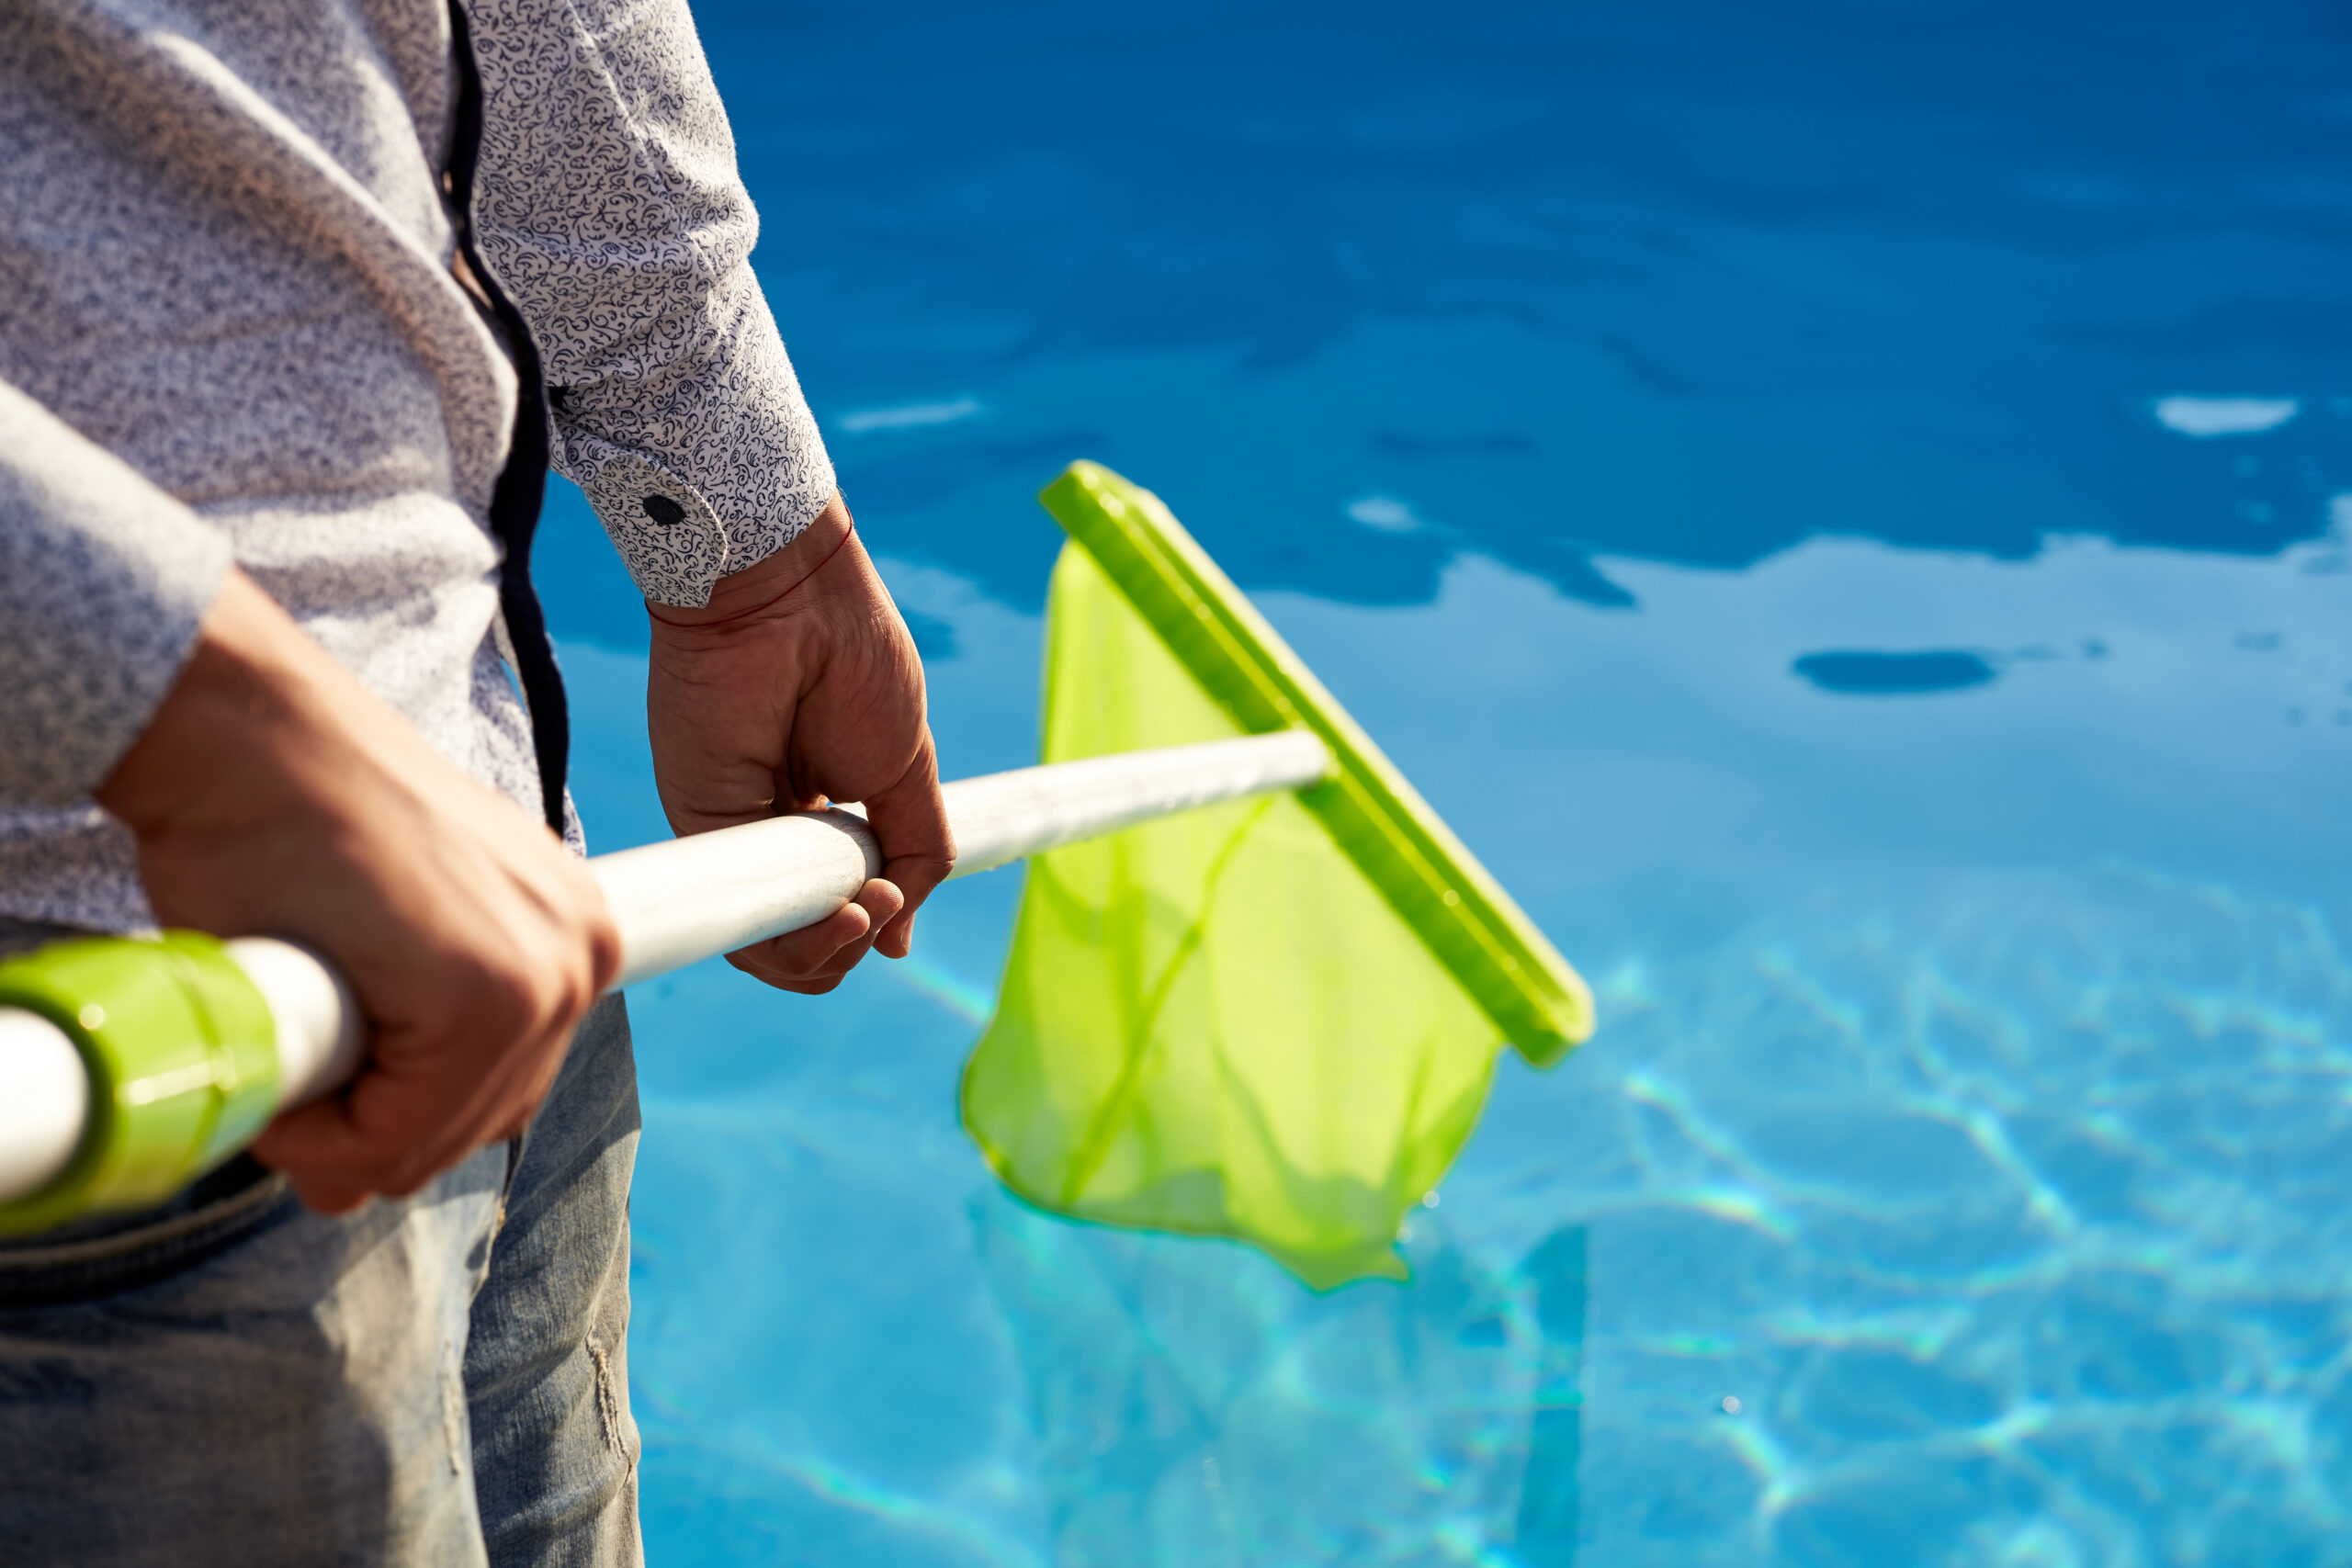 A man standing beside a swimming pool, holding a pool scoop net in his hand, ready to clean and remove debris from the pool water.